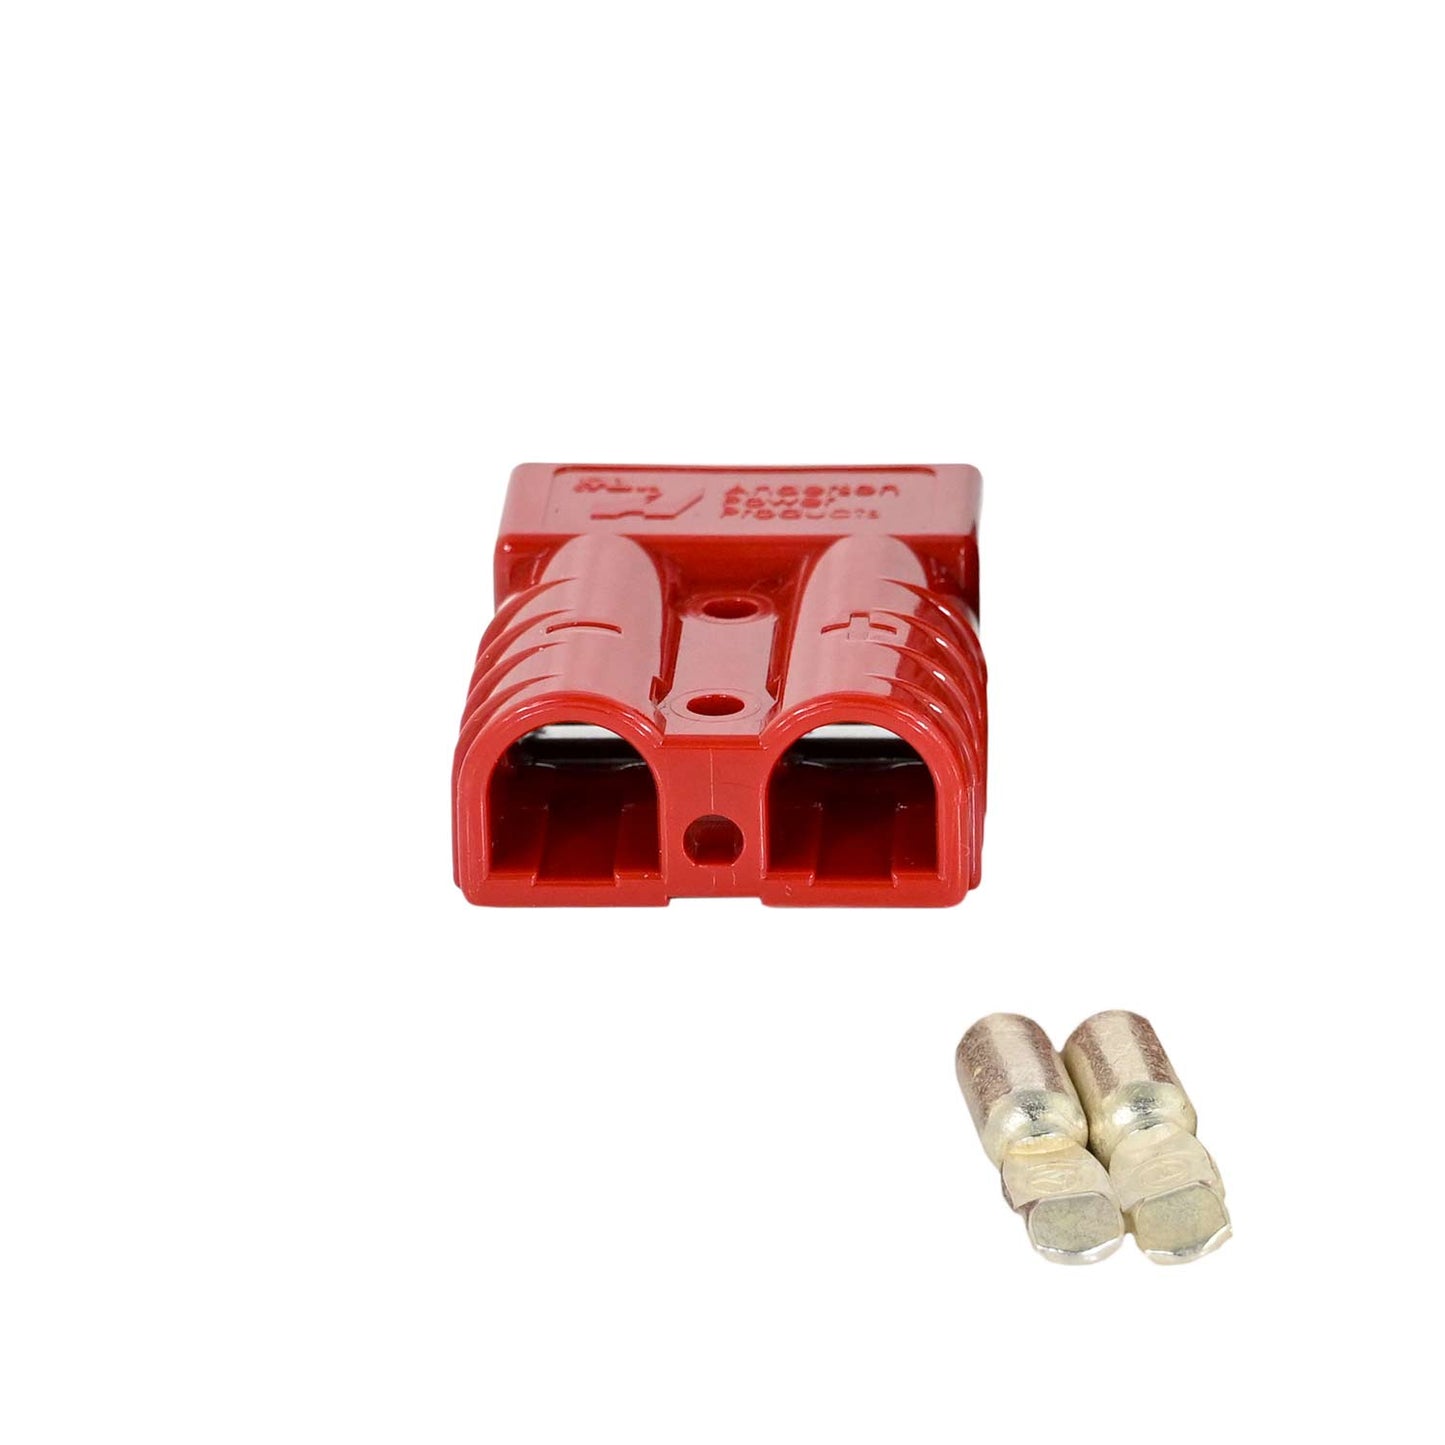 One SB175 Anderson Power Connector Housing, Two Metal Contacts For 1/0 Cables